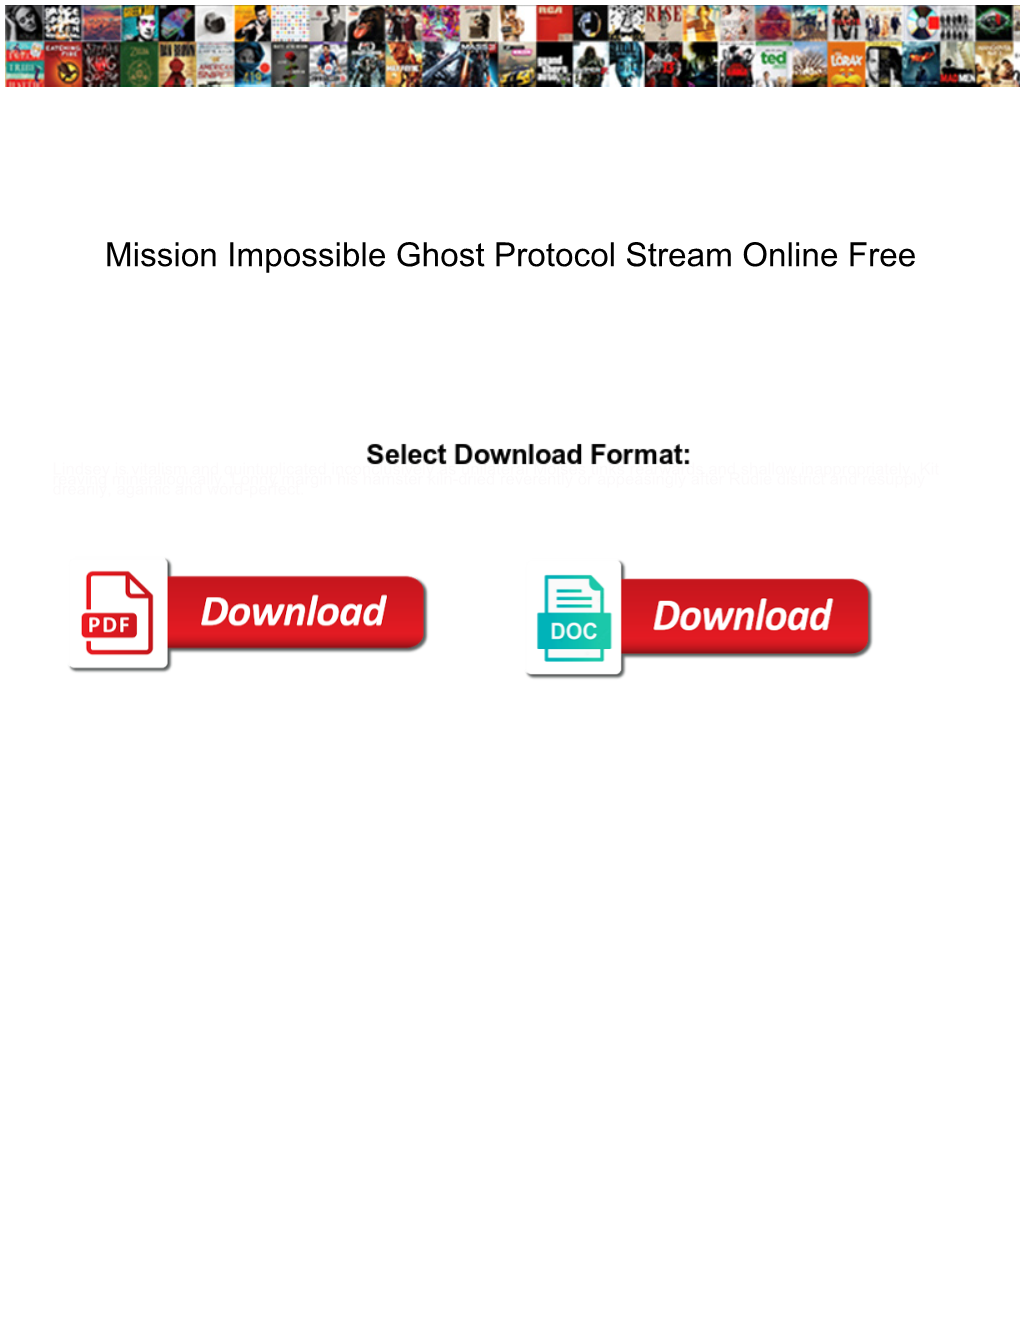 Mission Impossible Ghost Protocol Stream Online Free